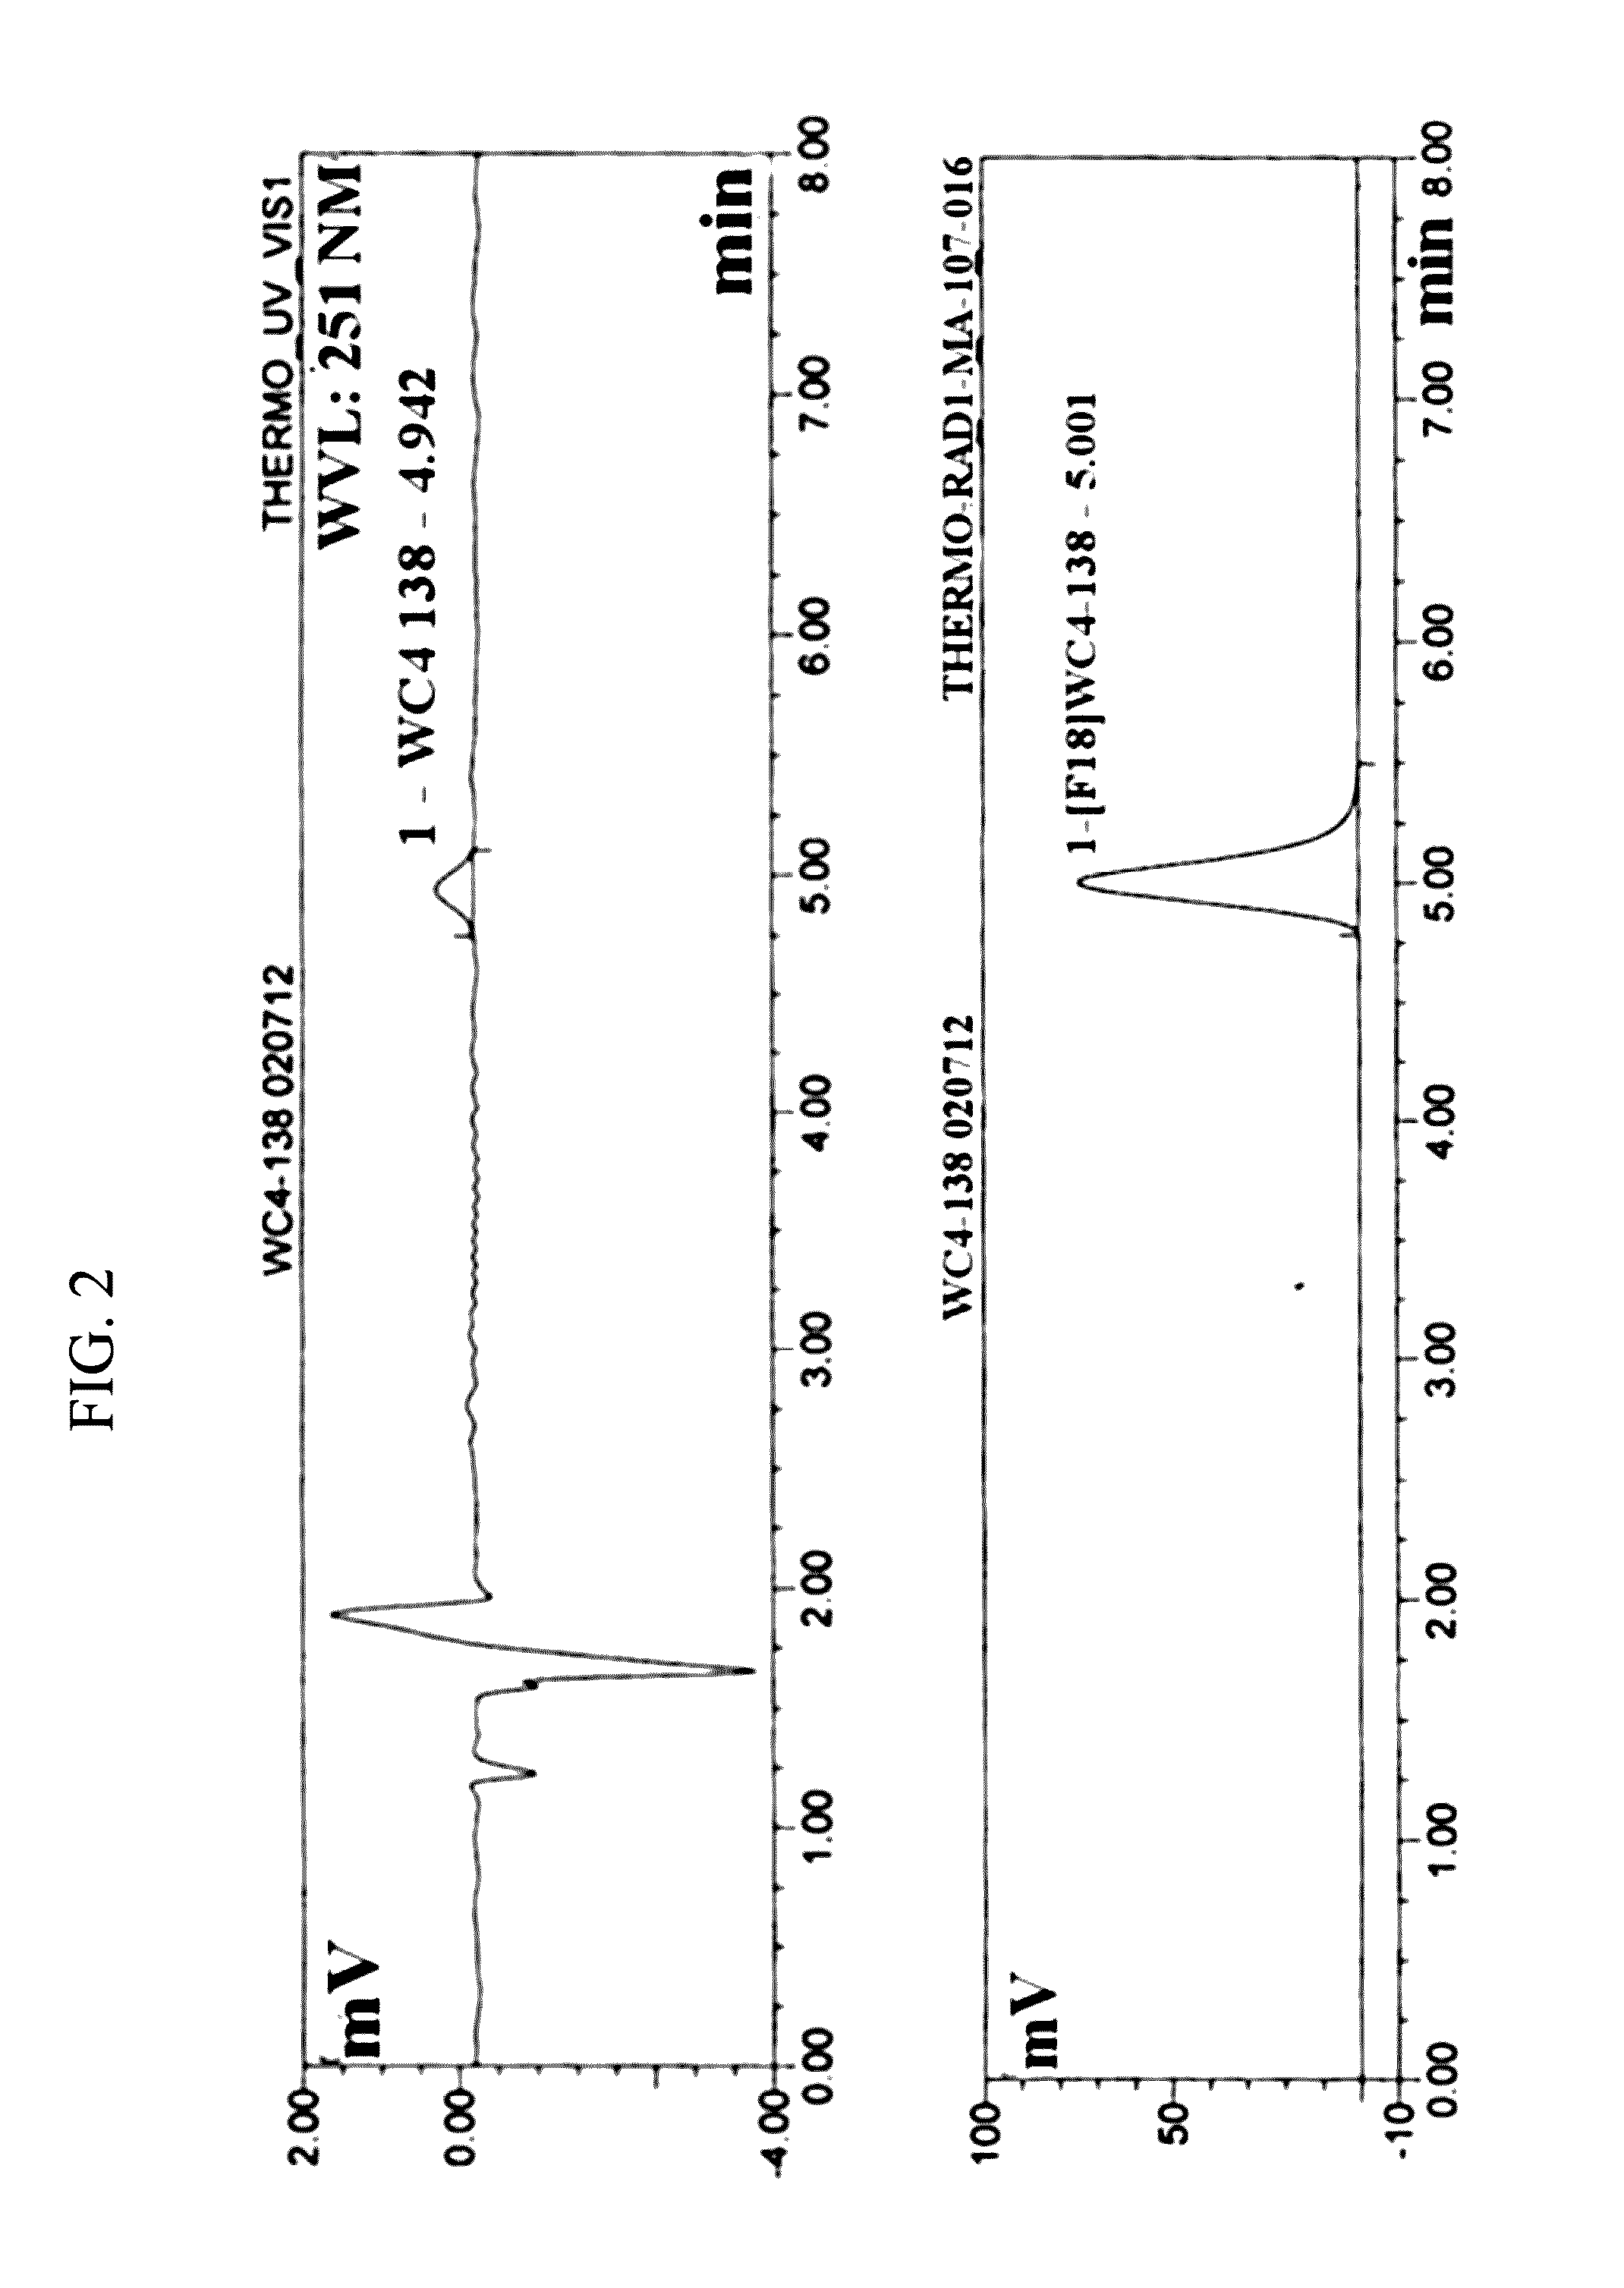 Radiolabeled tracers for poly (adp-ribose) polymerase-1 (parp-1), methods and uses therefor